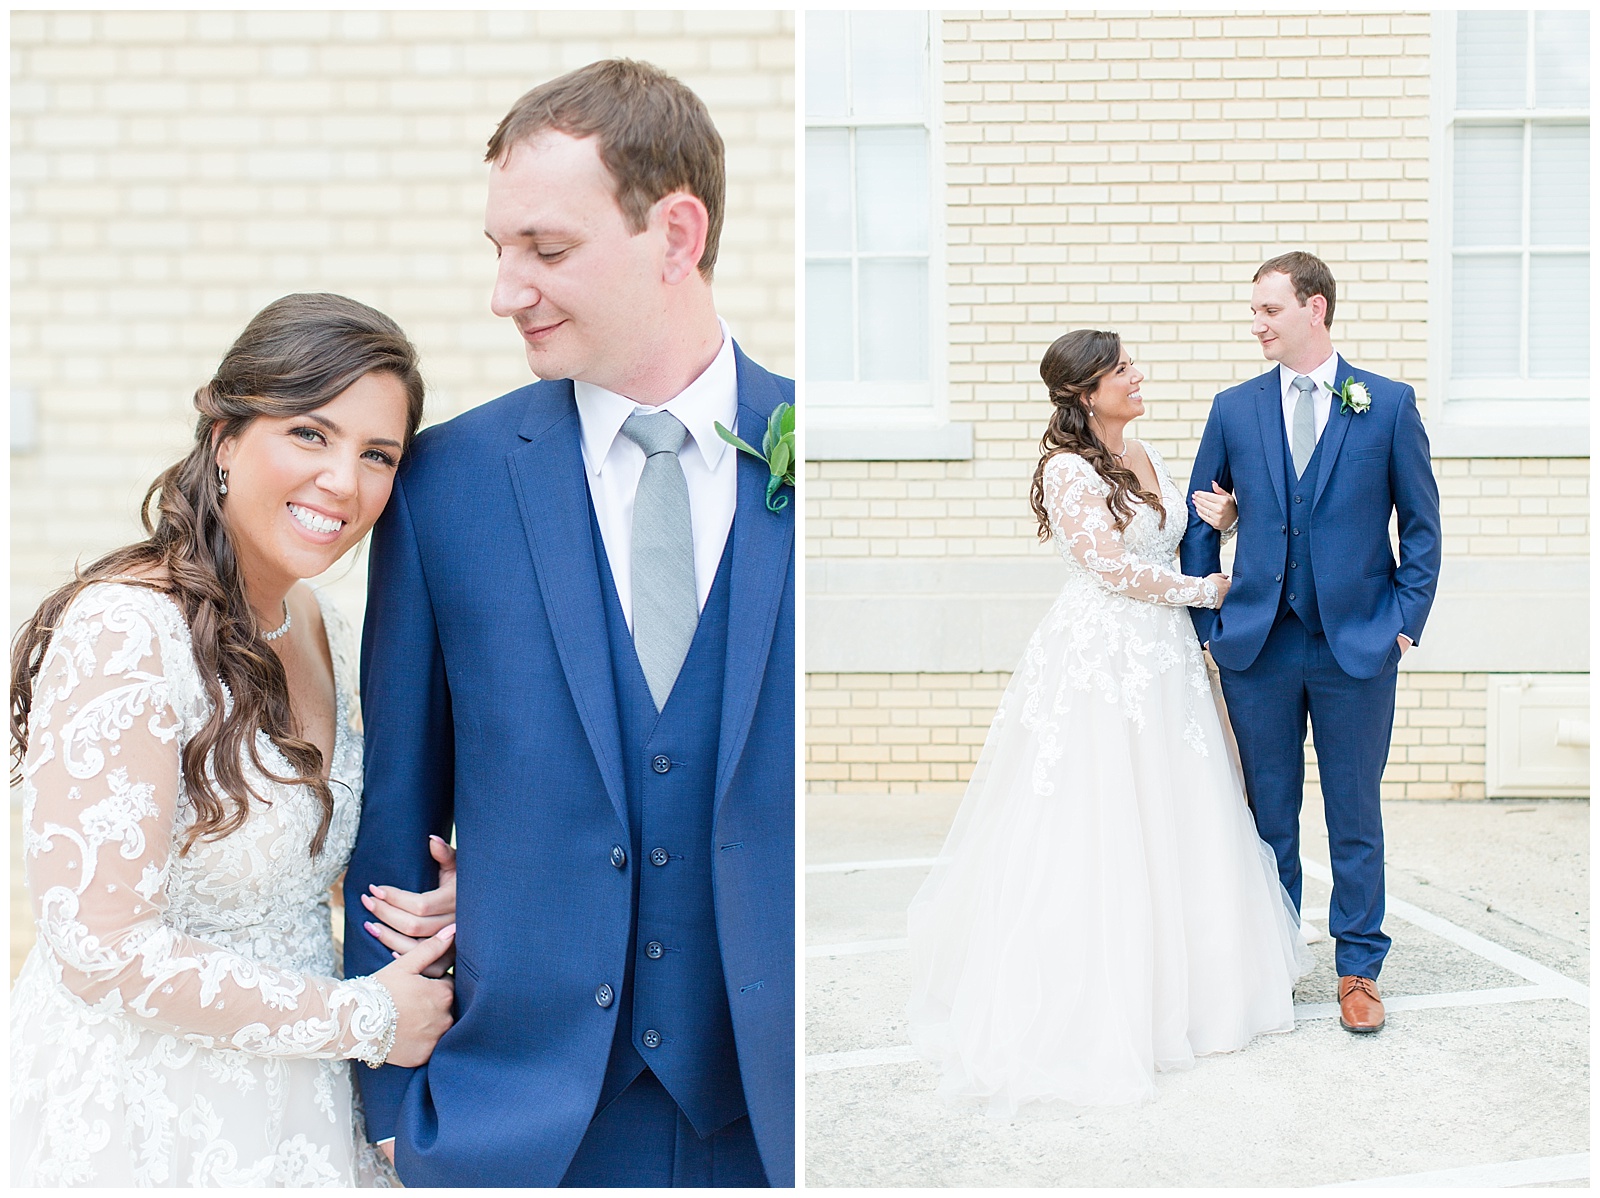 Bride and groom Portraits 